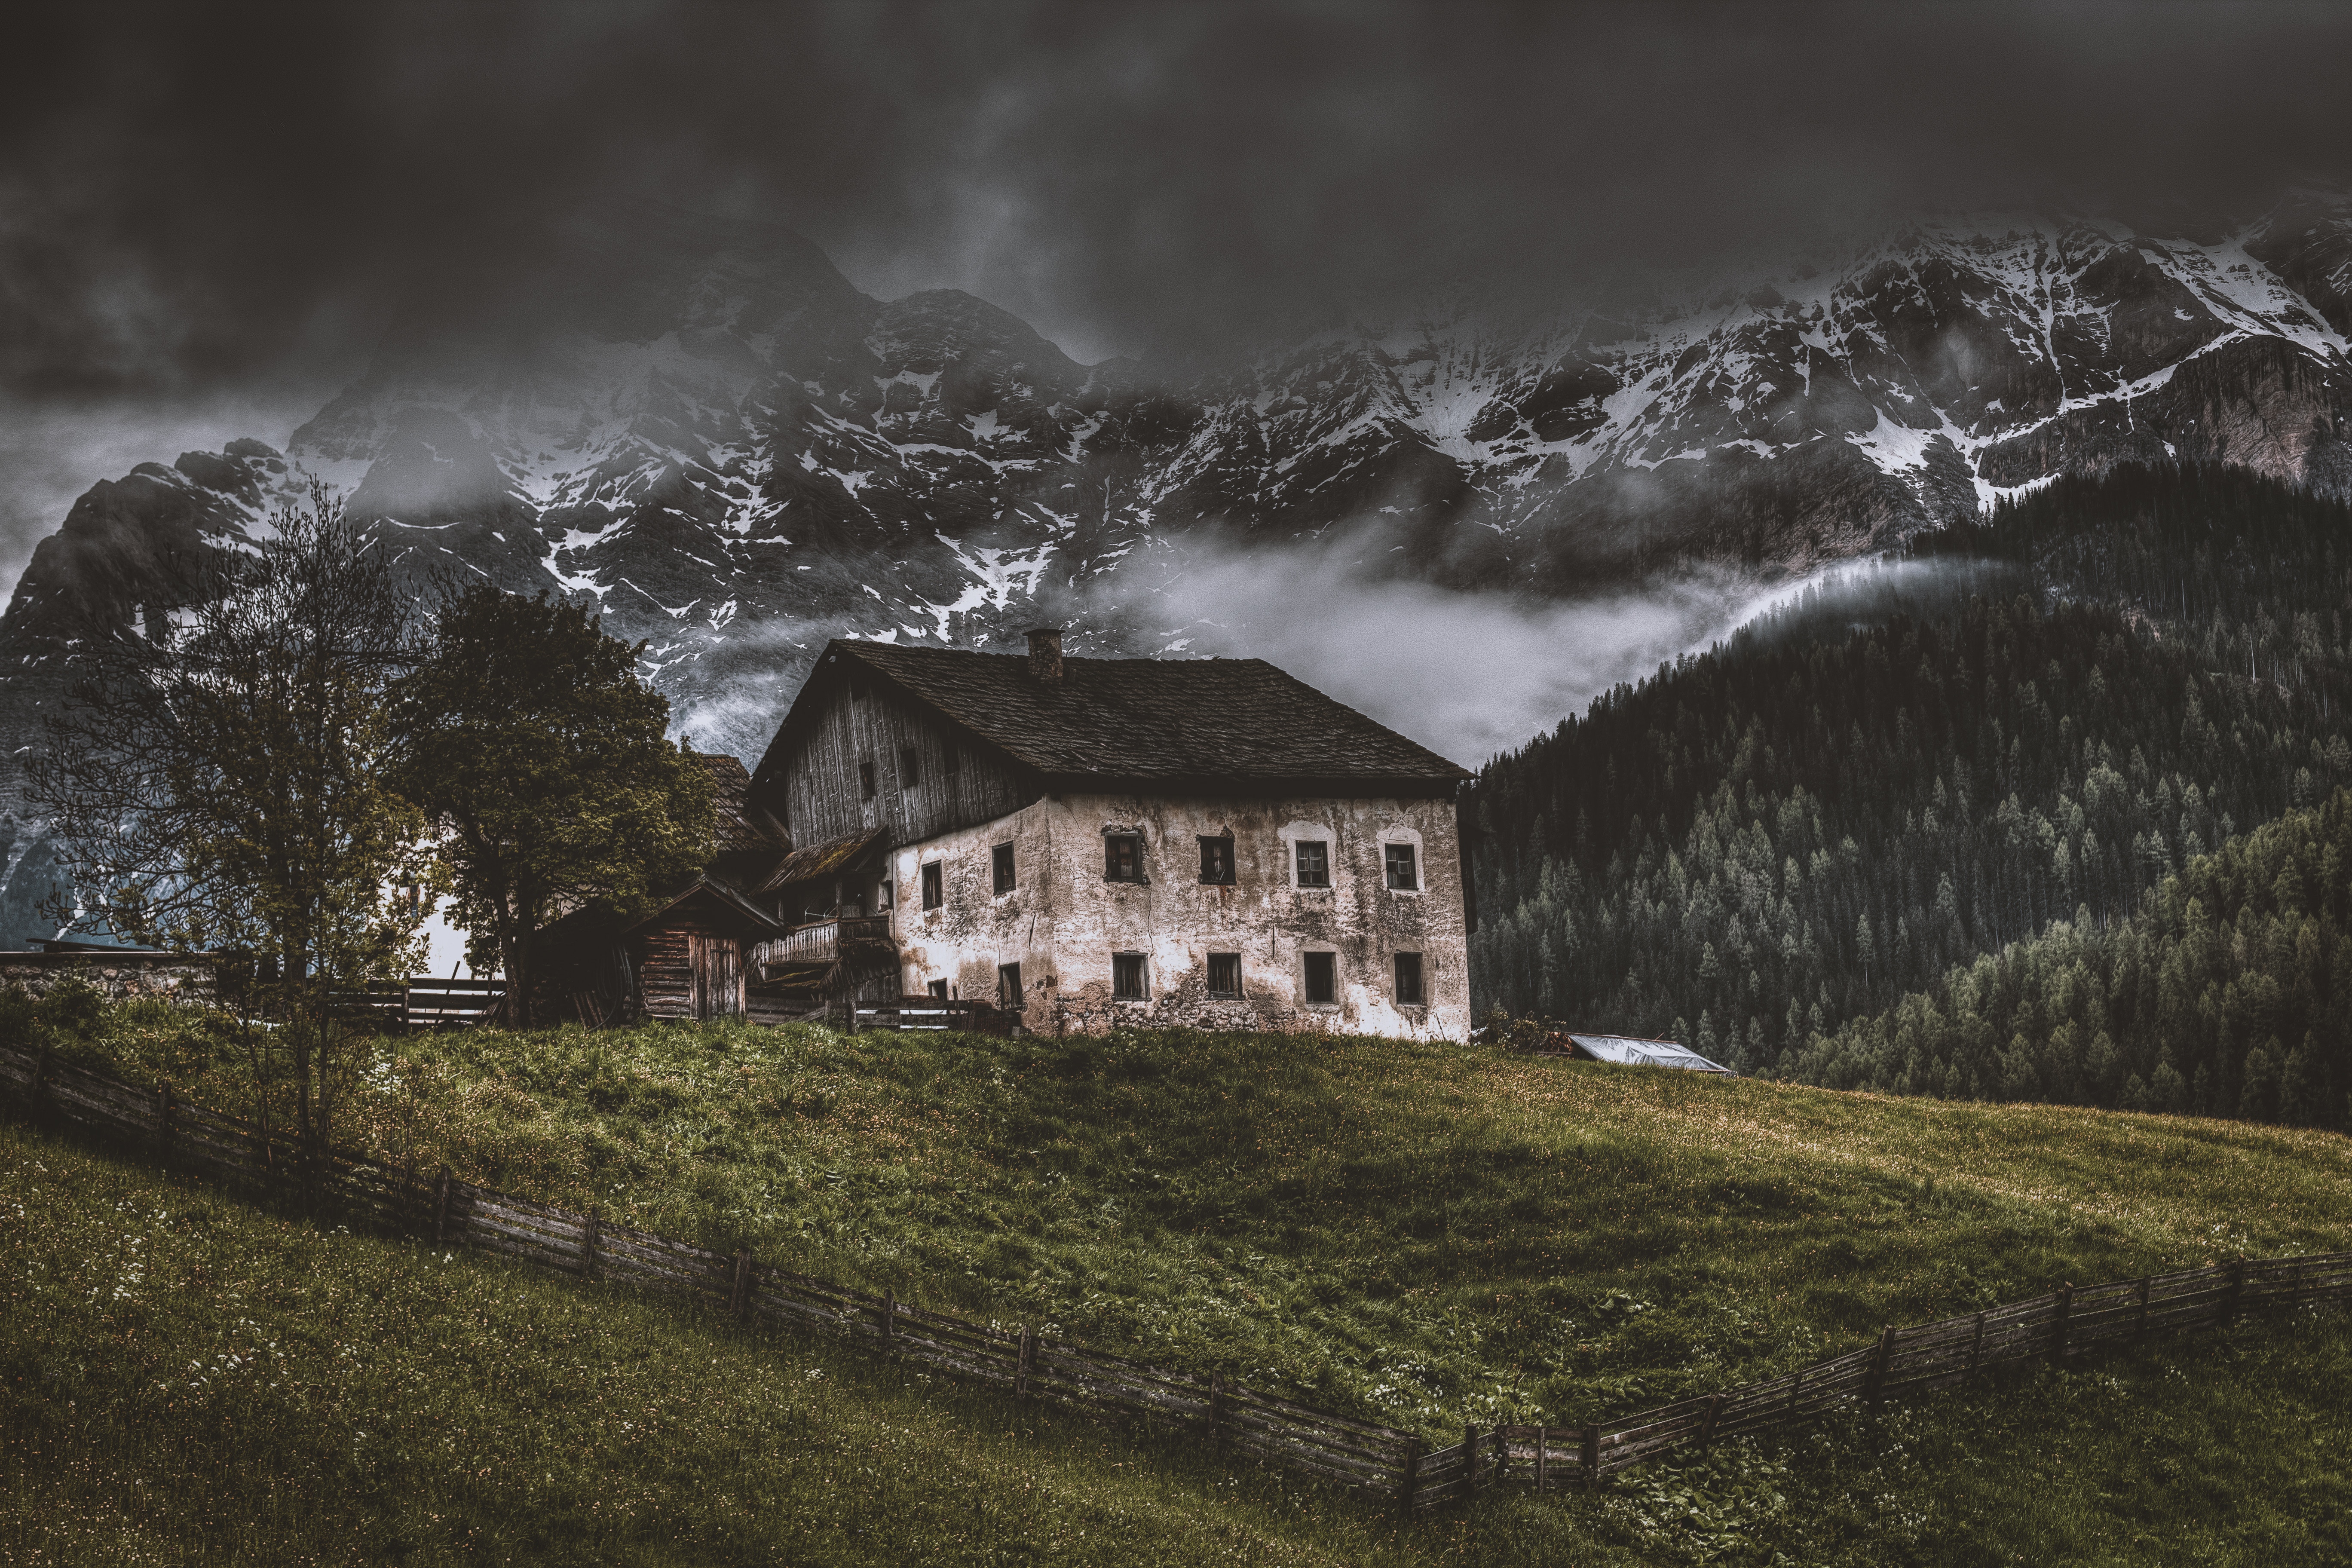 mountains, nature, grass, privacy, seclusion, fog, house, old, fencing, enclosure cellphone